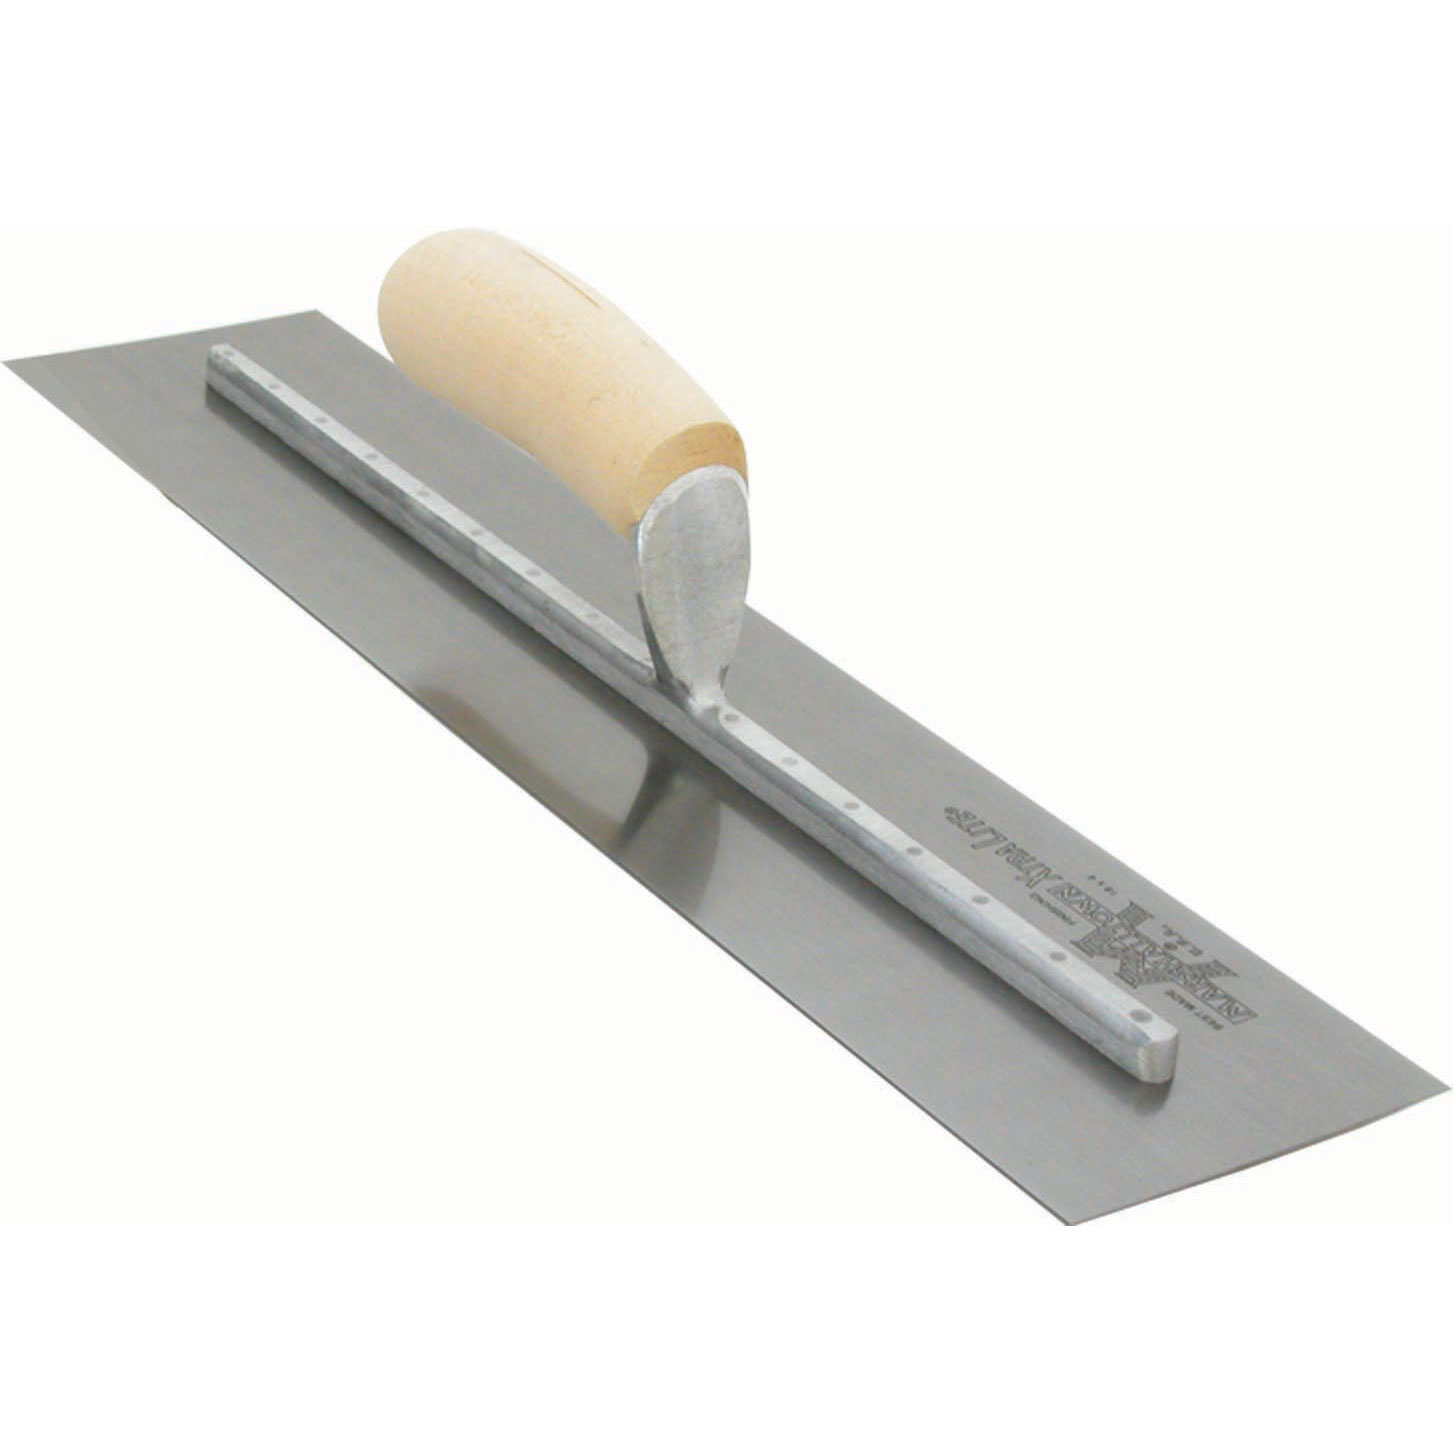 Marshalltown MXS81 18in. x 4in. Finishing Trowel Curved Wood Handle MAT-MXS81